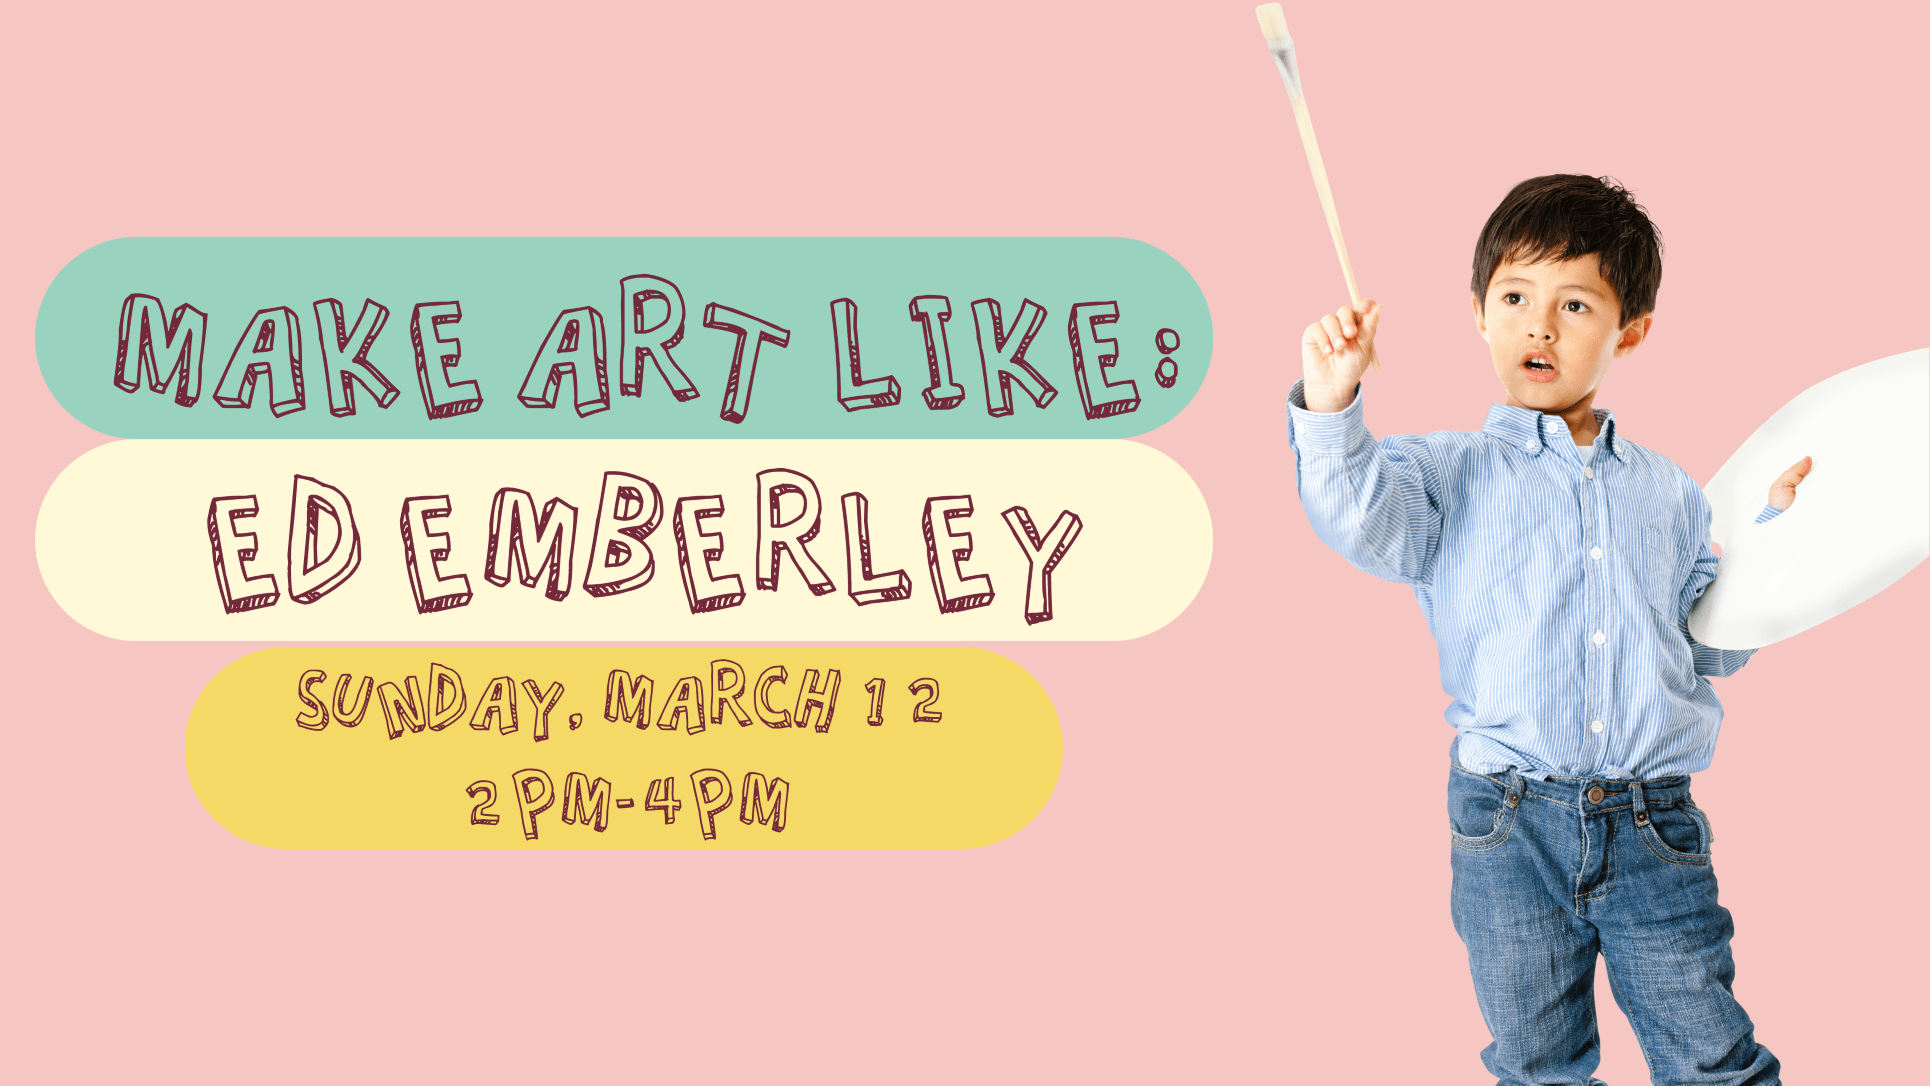 A child paints the program's title and date Sunday March 12, 2 to 4 PM